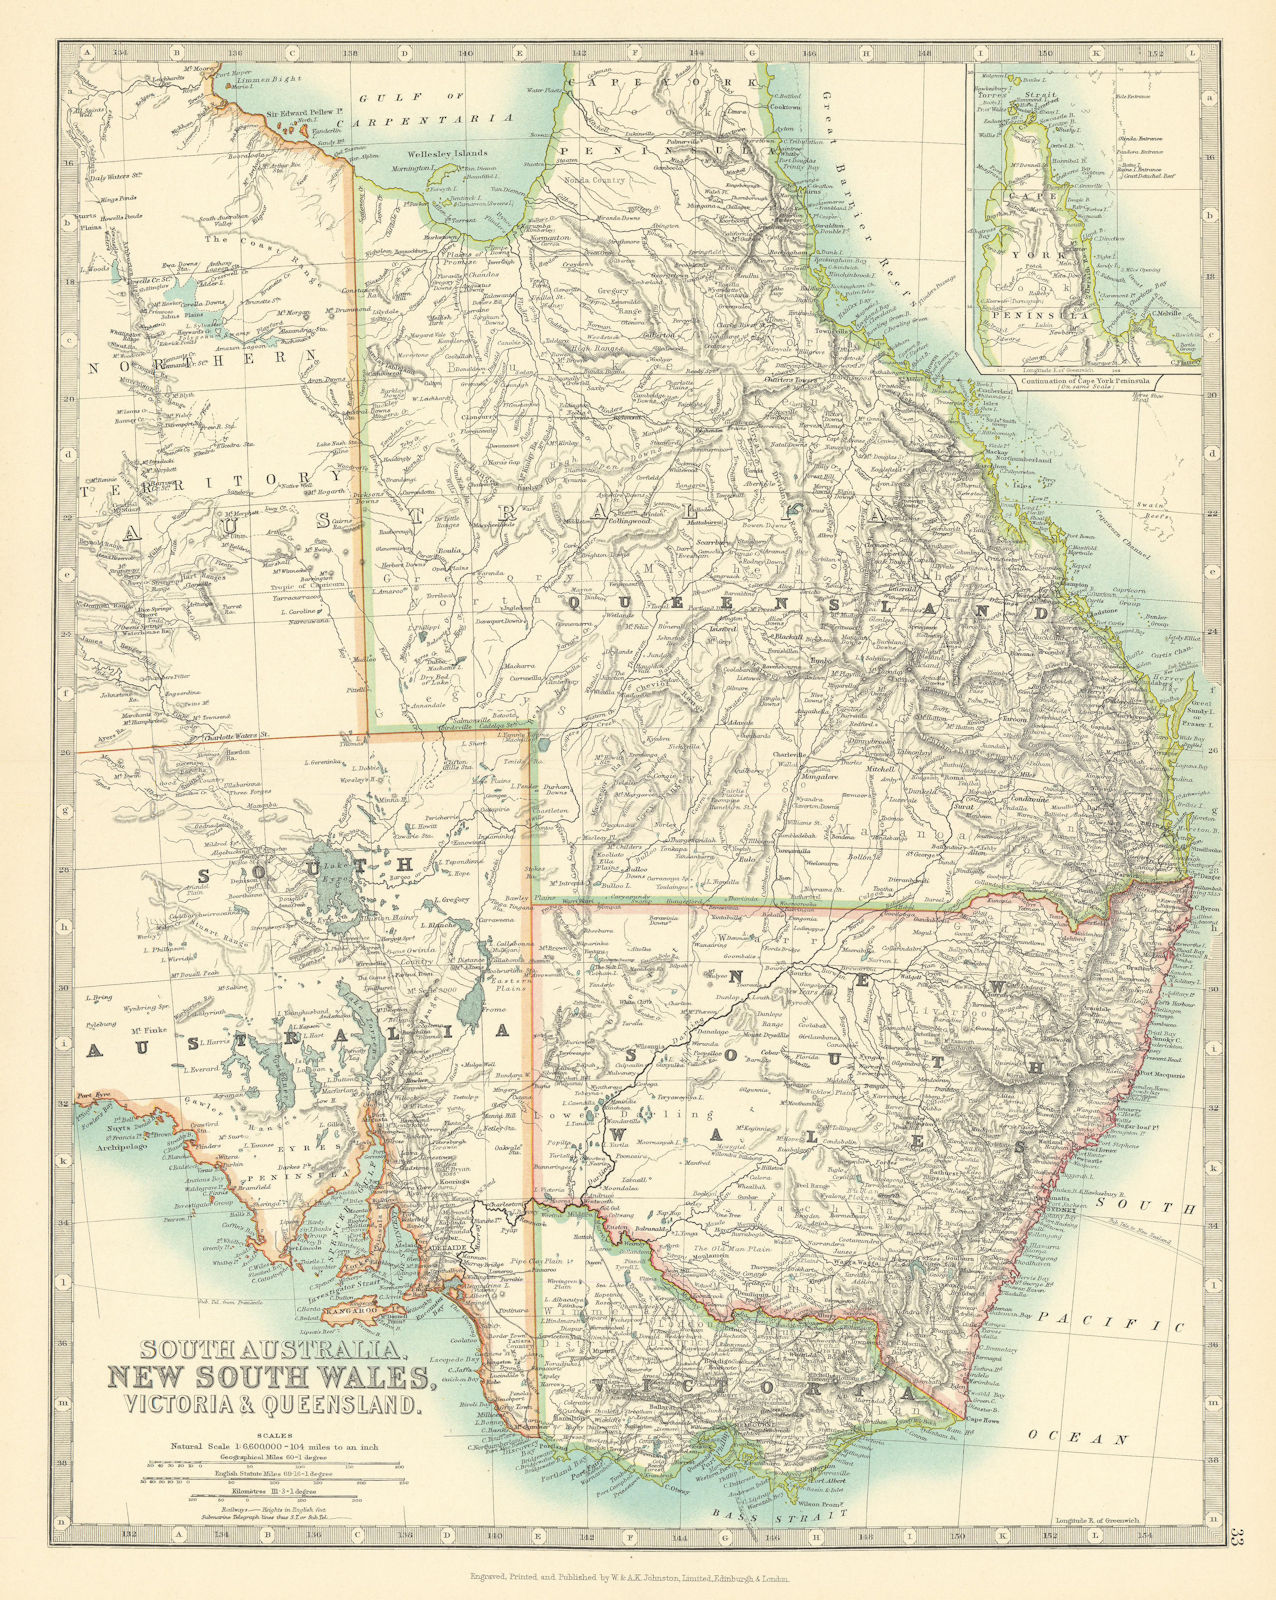 Associate Product EASTERN AUSTRALIA. Queensland, New South Wales & Victoria. JOHNSTON 1911 map